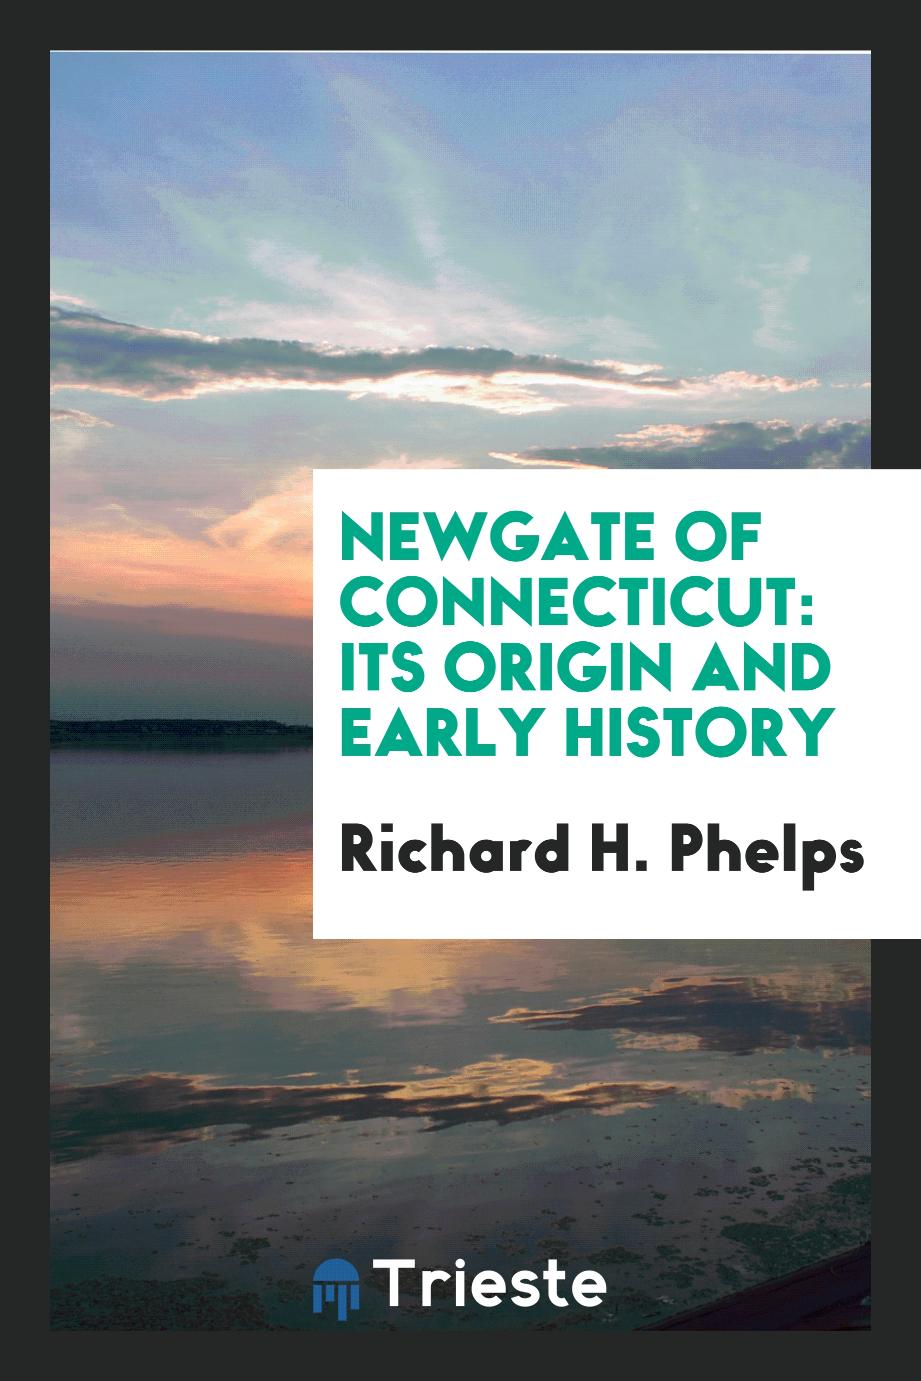 Newgate of Connecticut: Its Origin and Early History